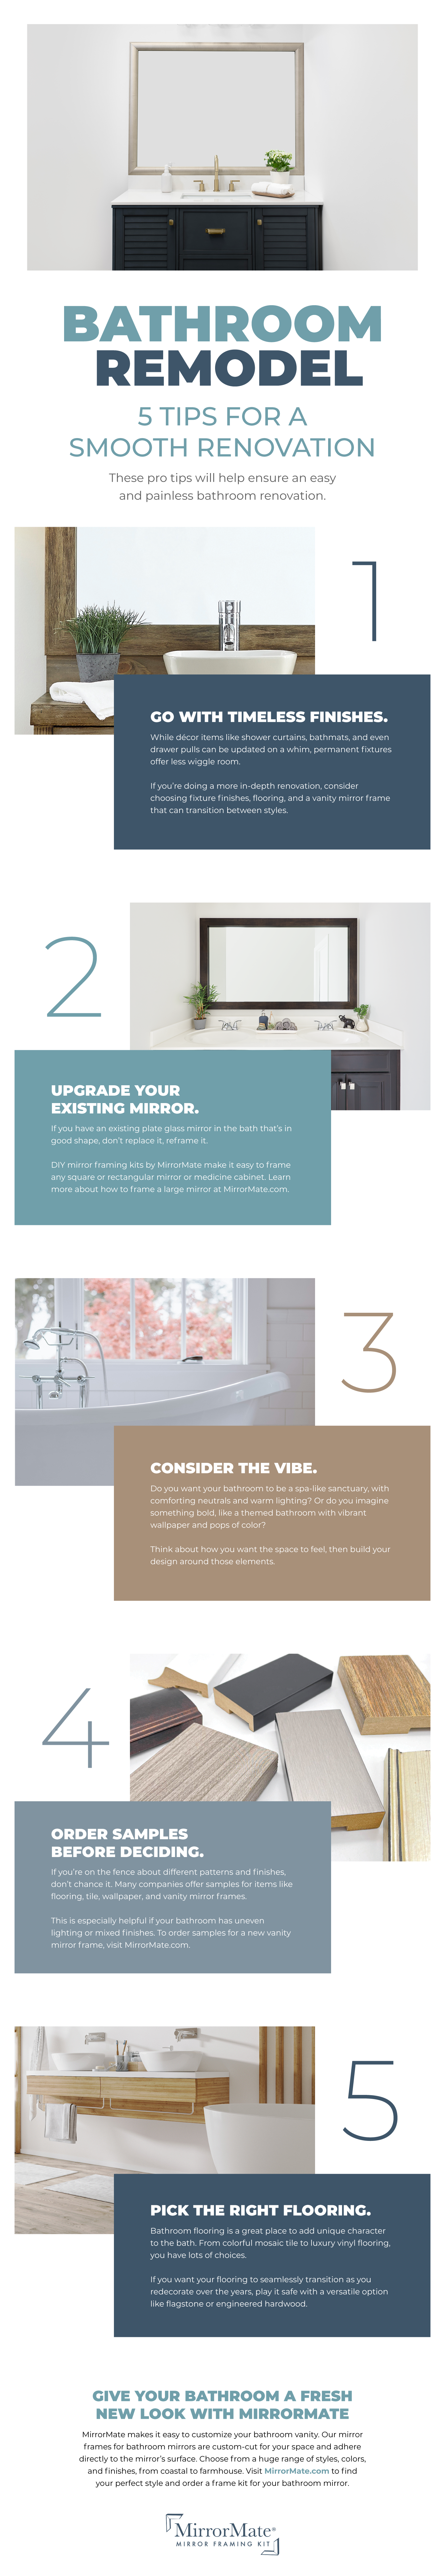 Bathroom Remodel Tips Infographic